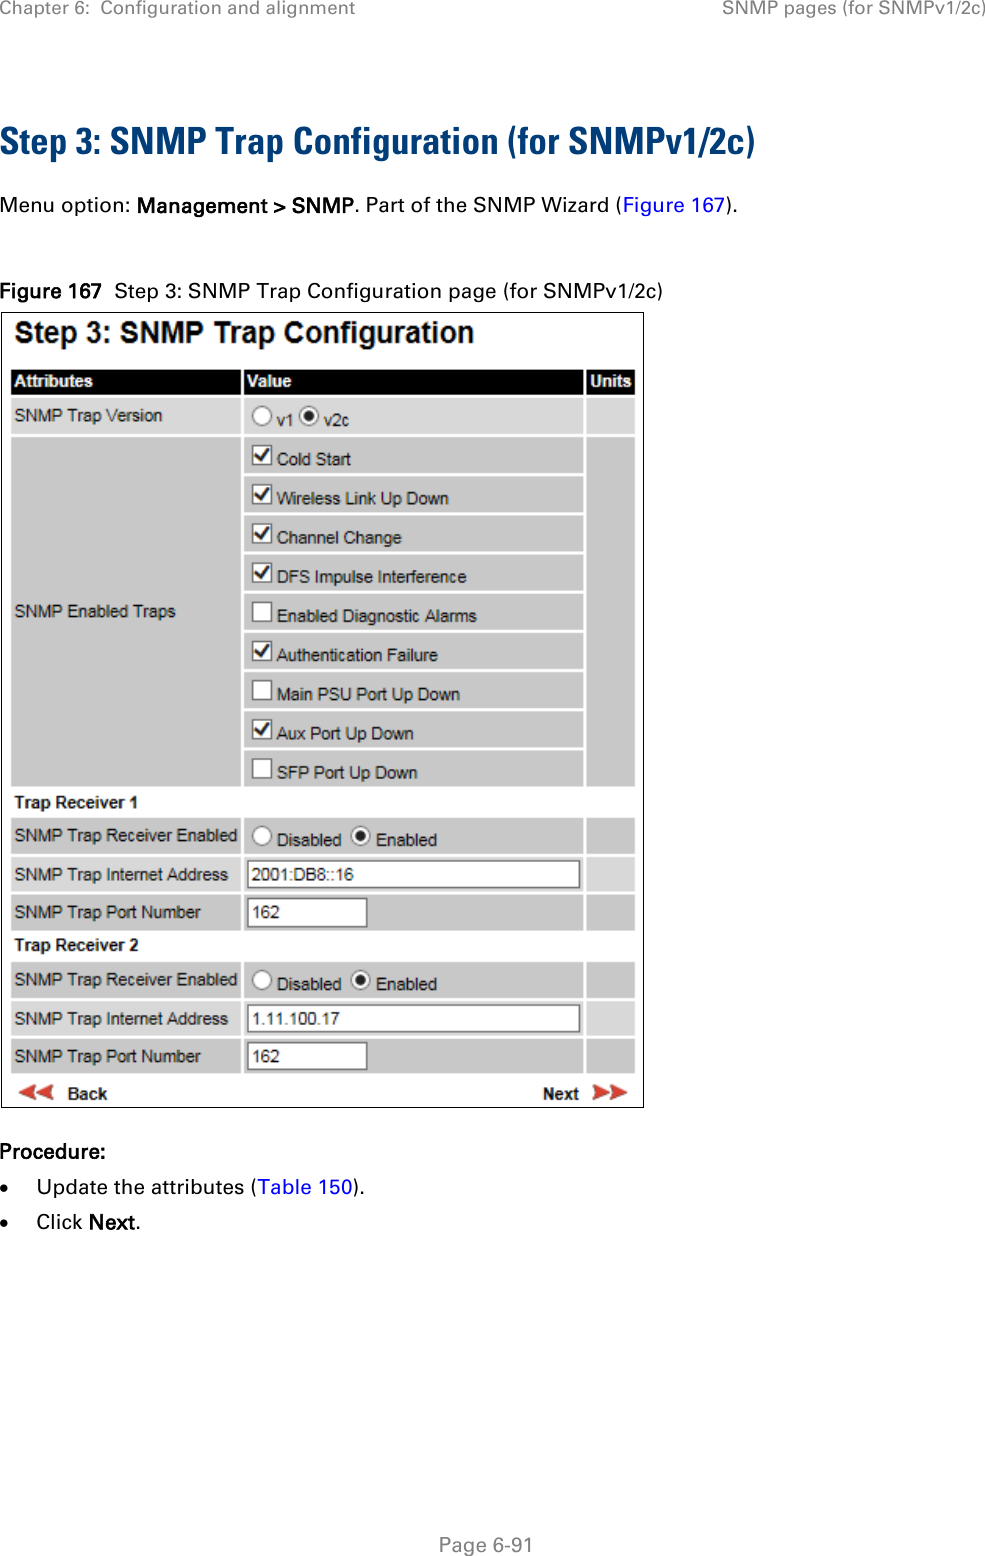 Chapter 6:  Configuration and alignment SNMP pages (for SNMPv1/2c)  Step 3: SNMP Trap Configuration (for SNMPv1/2c) Menu option: Management &gt; SNMP. Part of the SNMP Wizard (Figure 167).  Figure 167  Step 3: SNMP Trap Configuration page (for SNMPv1/2c)  Procedure: • Update the attributes (Table 150). • Click Next.      Page 6-91 